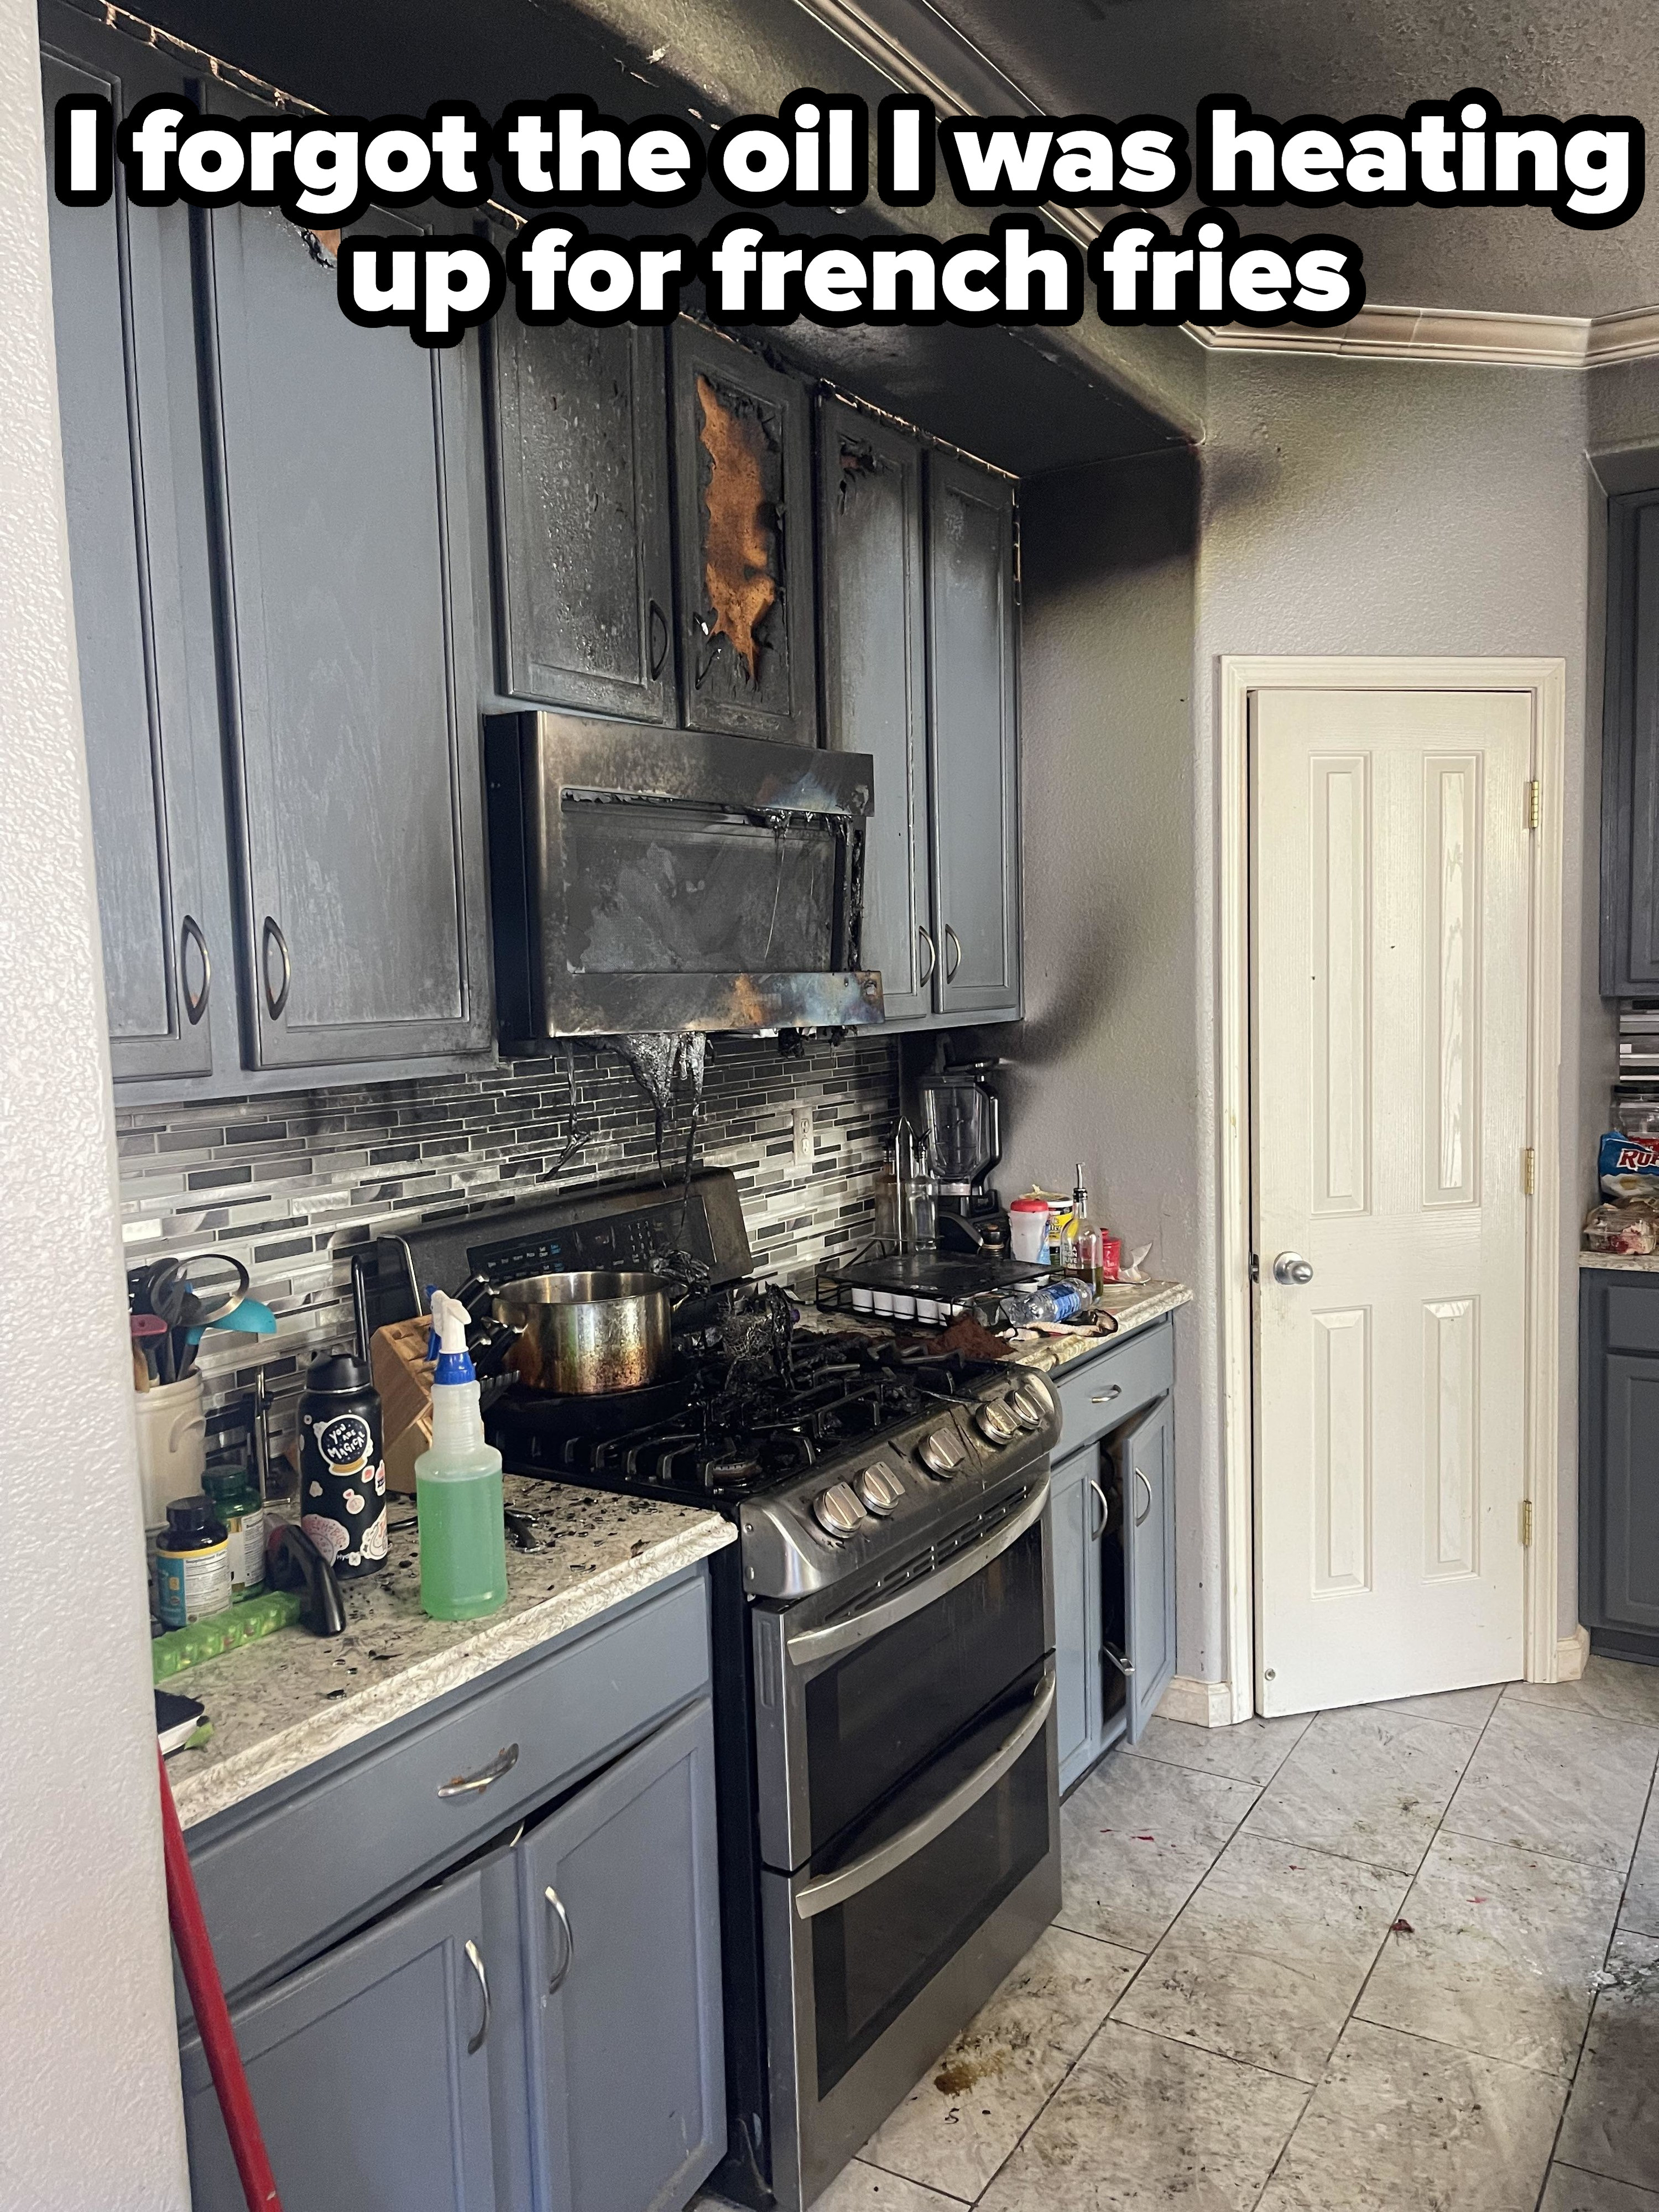 oil explosion in a kitchen